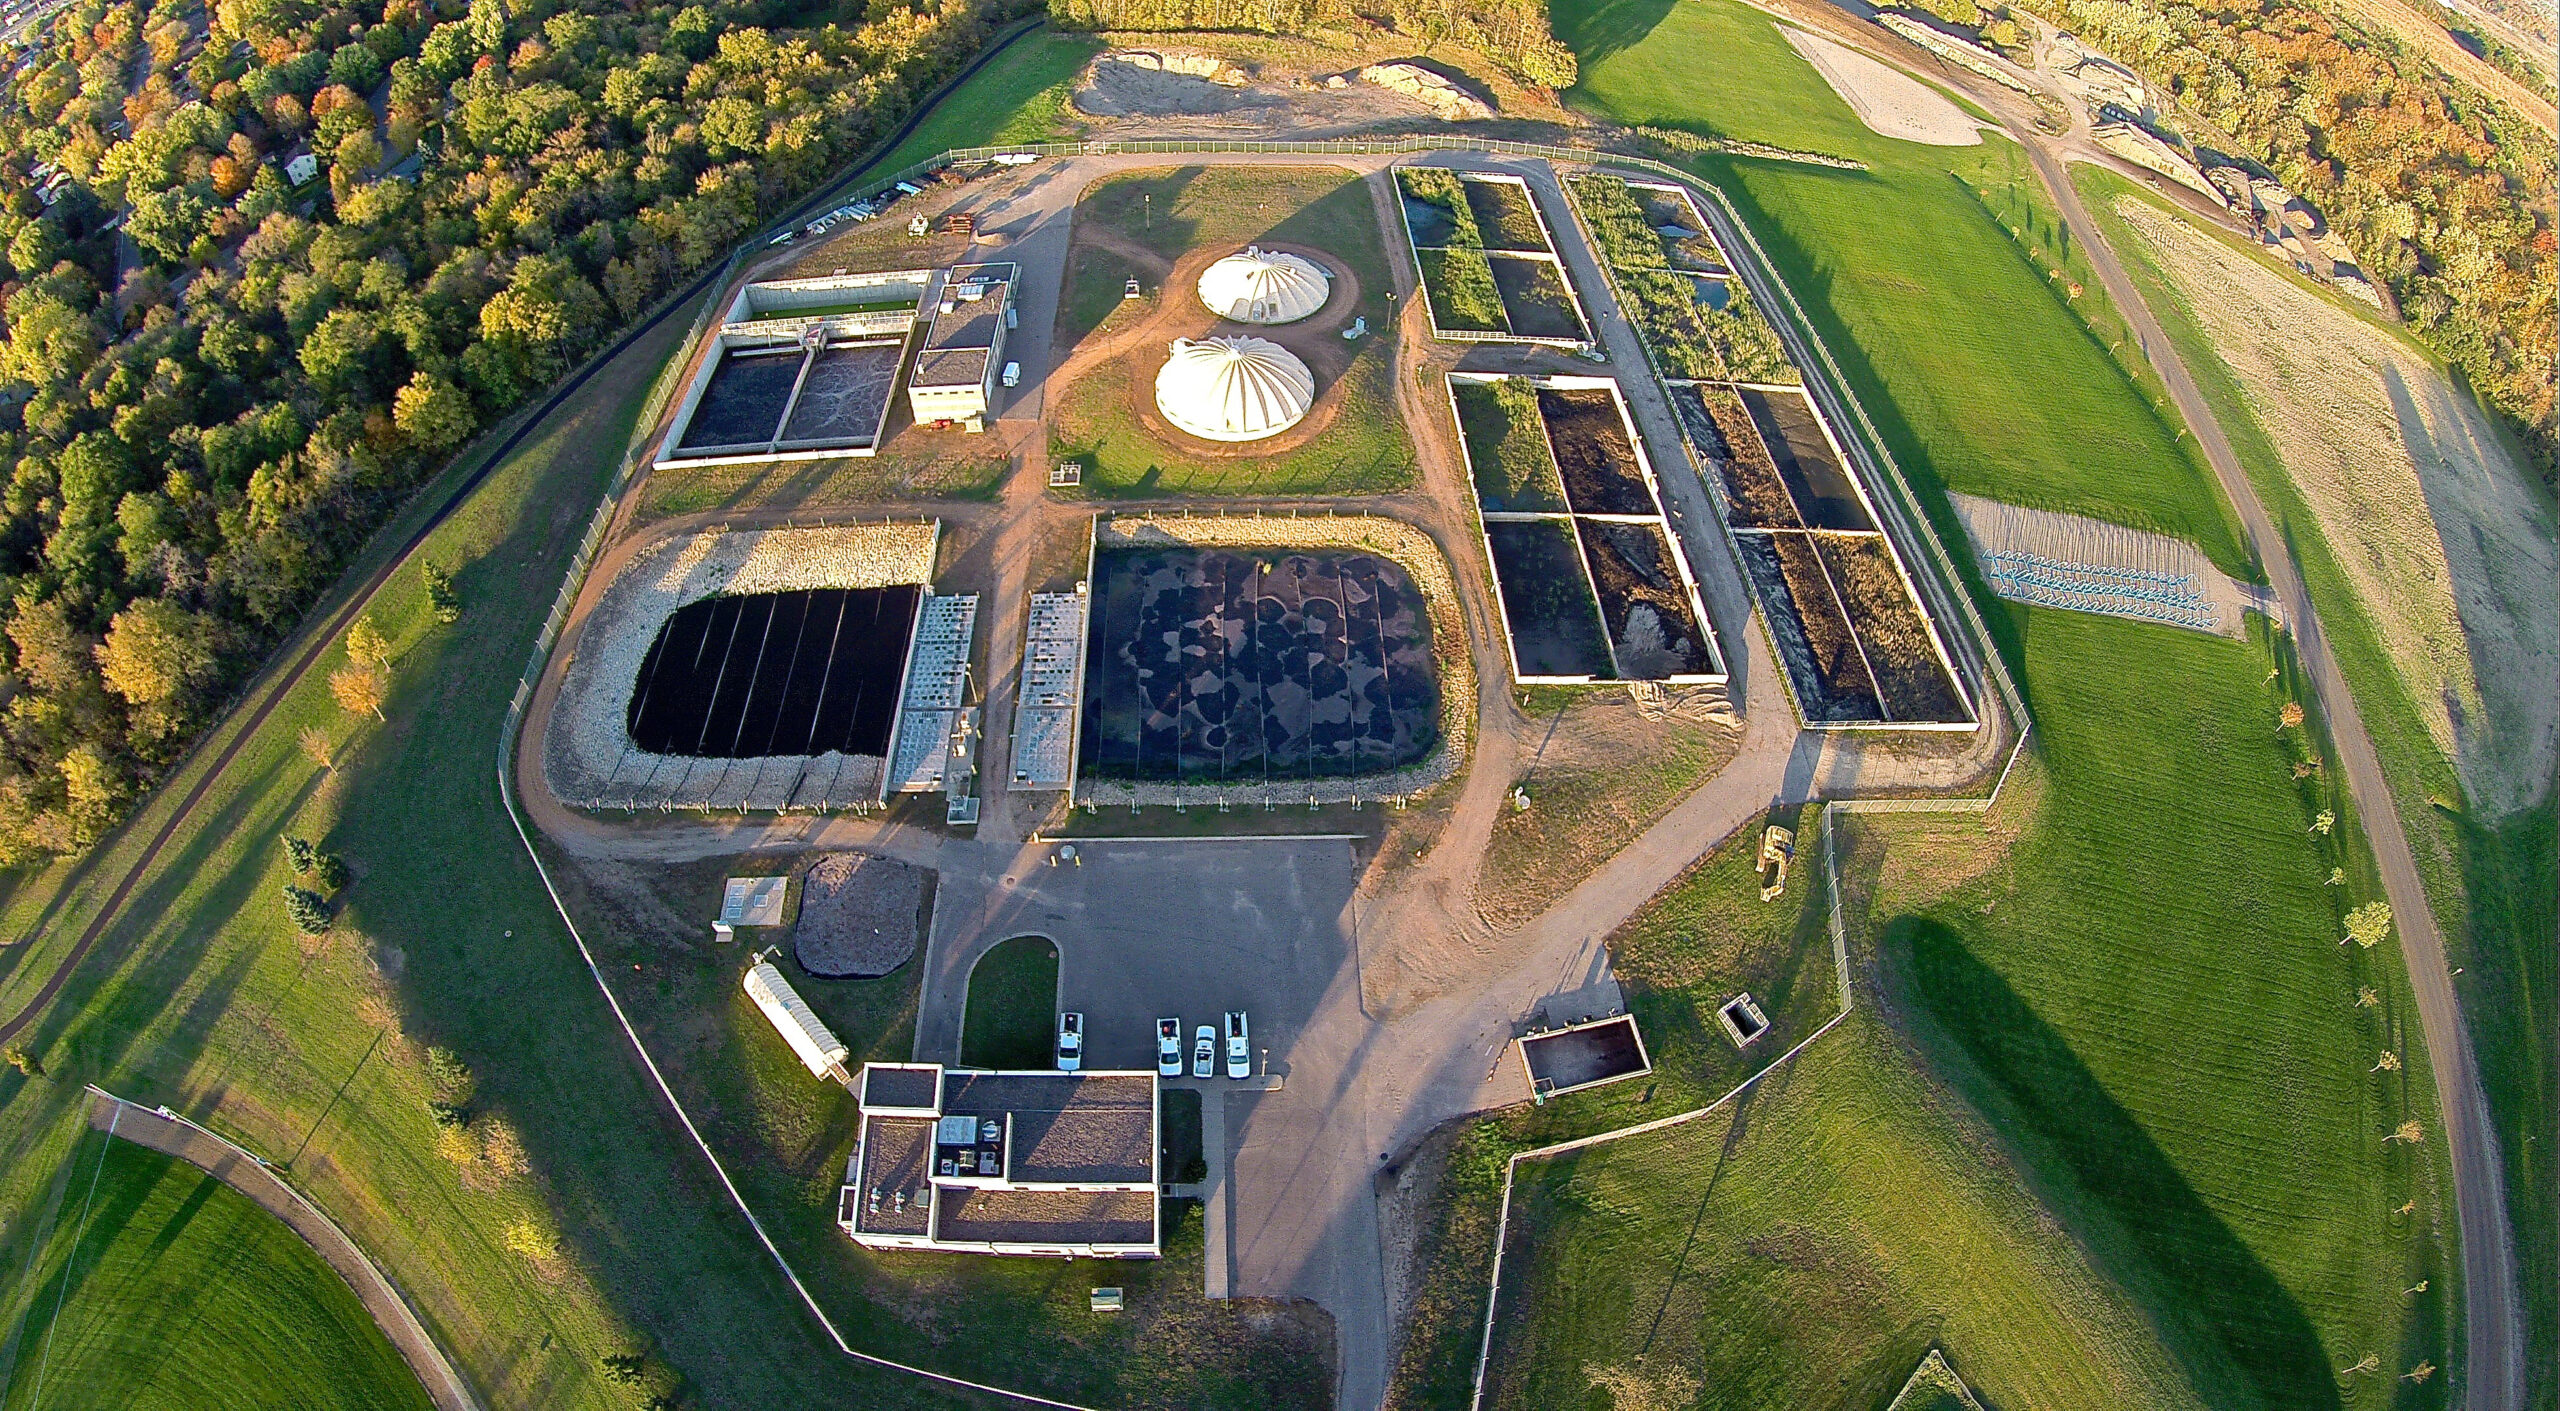 St. Michael Wastewater Treatment Facility